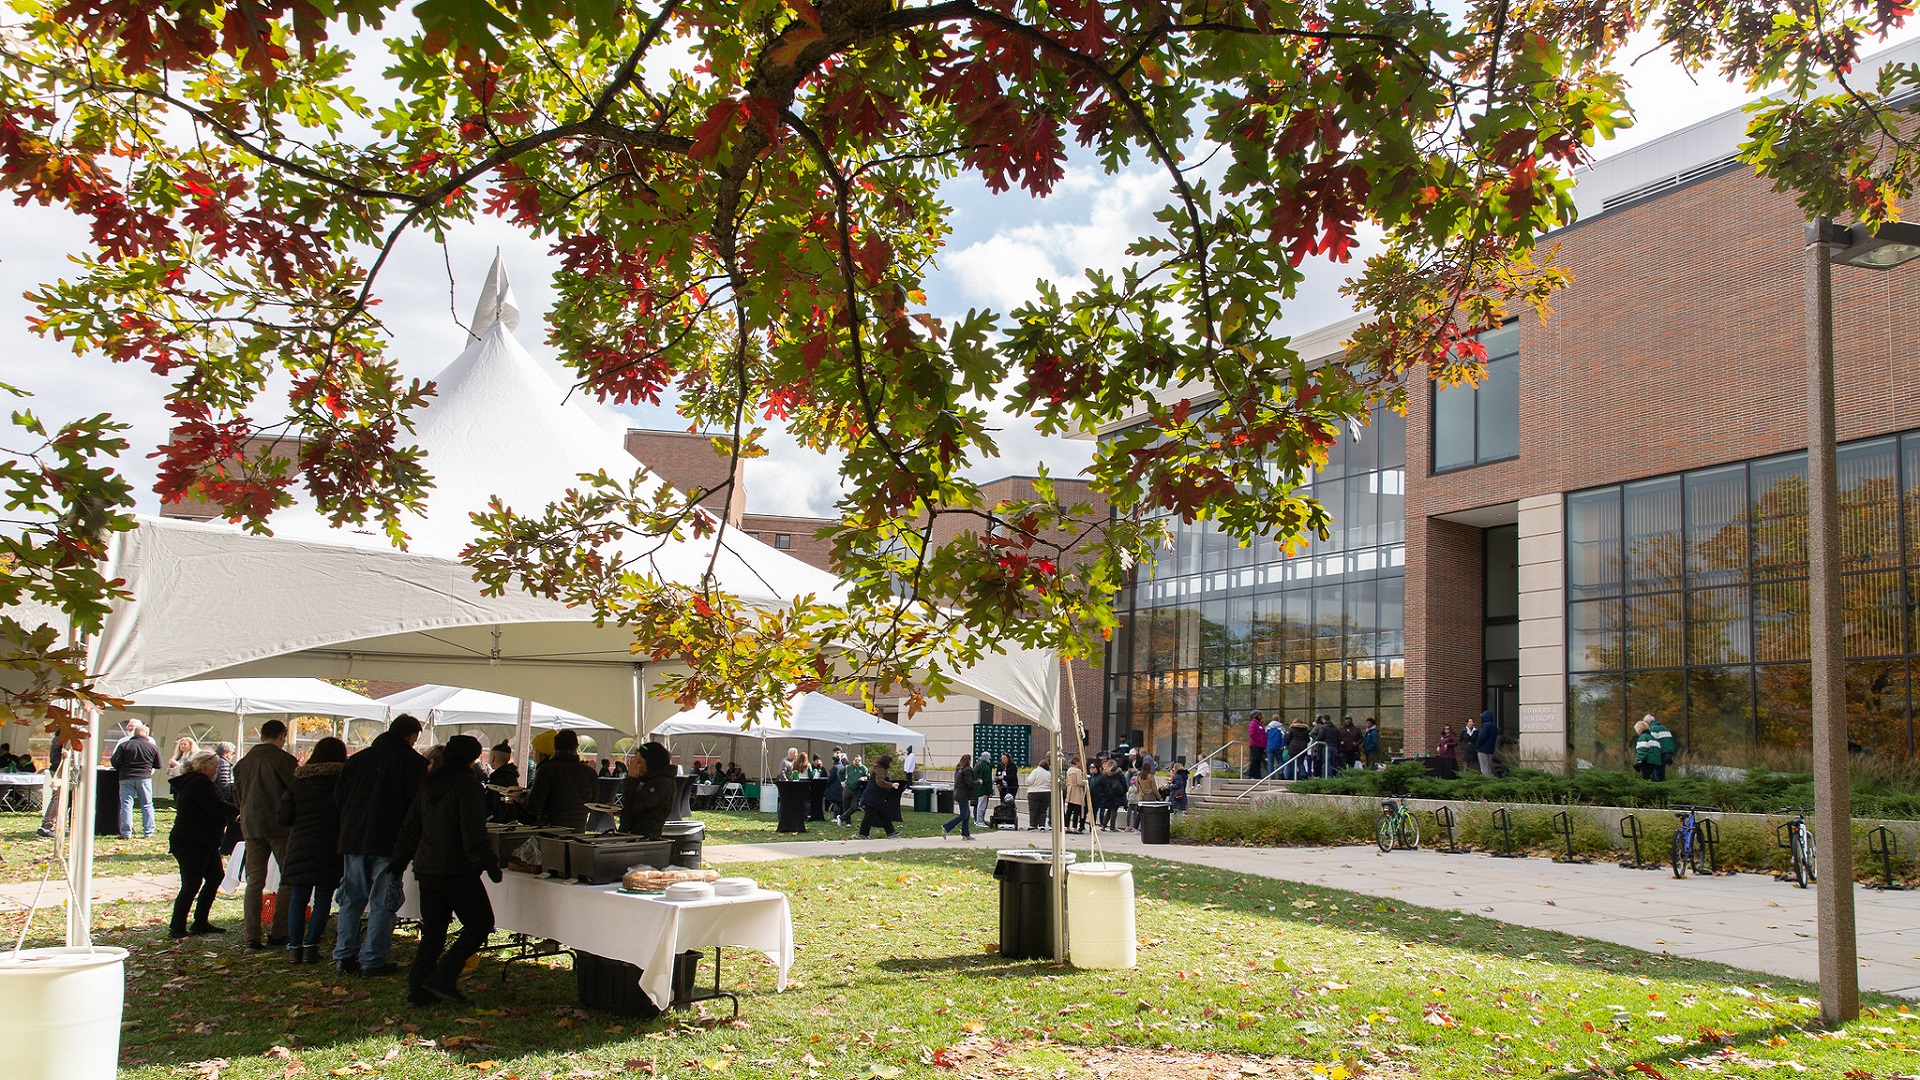 The Minskoff Pavilion's north Secchia Lawn filled with a tent and people gathering for Homecoming, from the viewpoint beneath a tree with its leaves changing colors during fall.